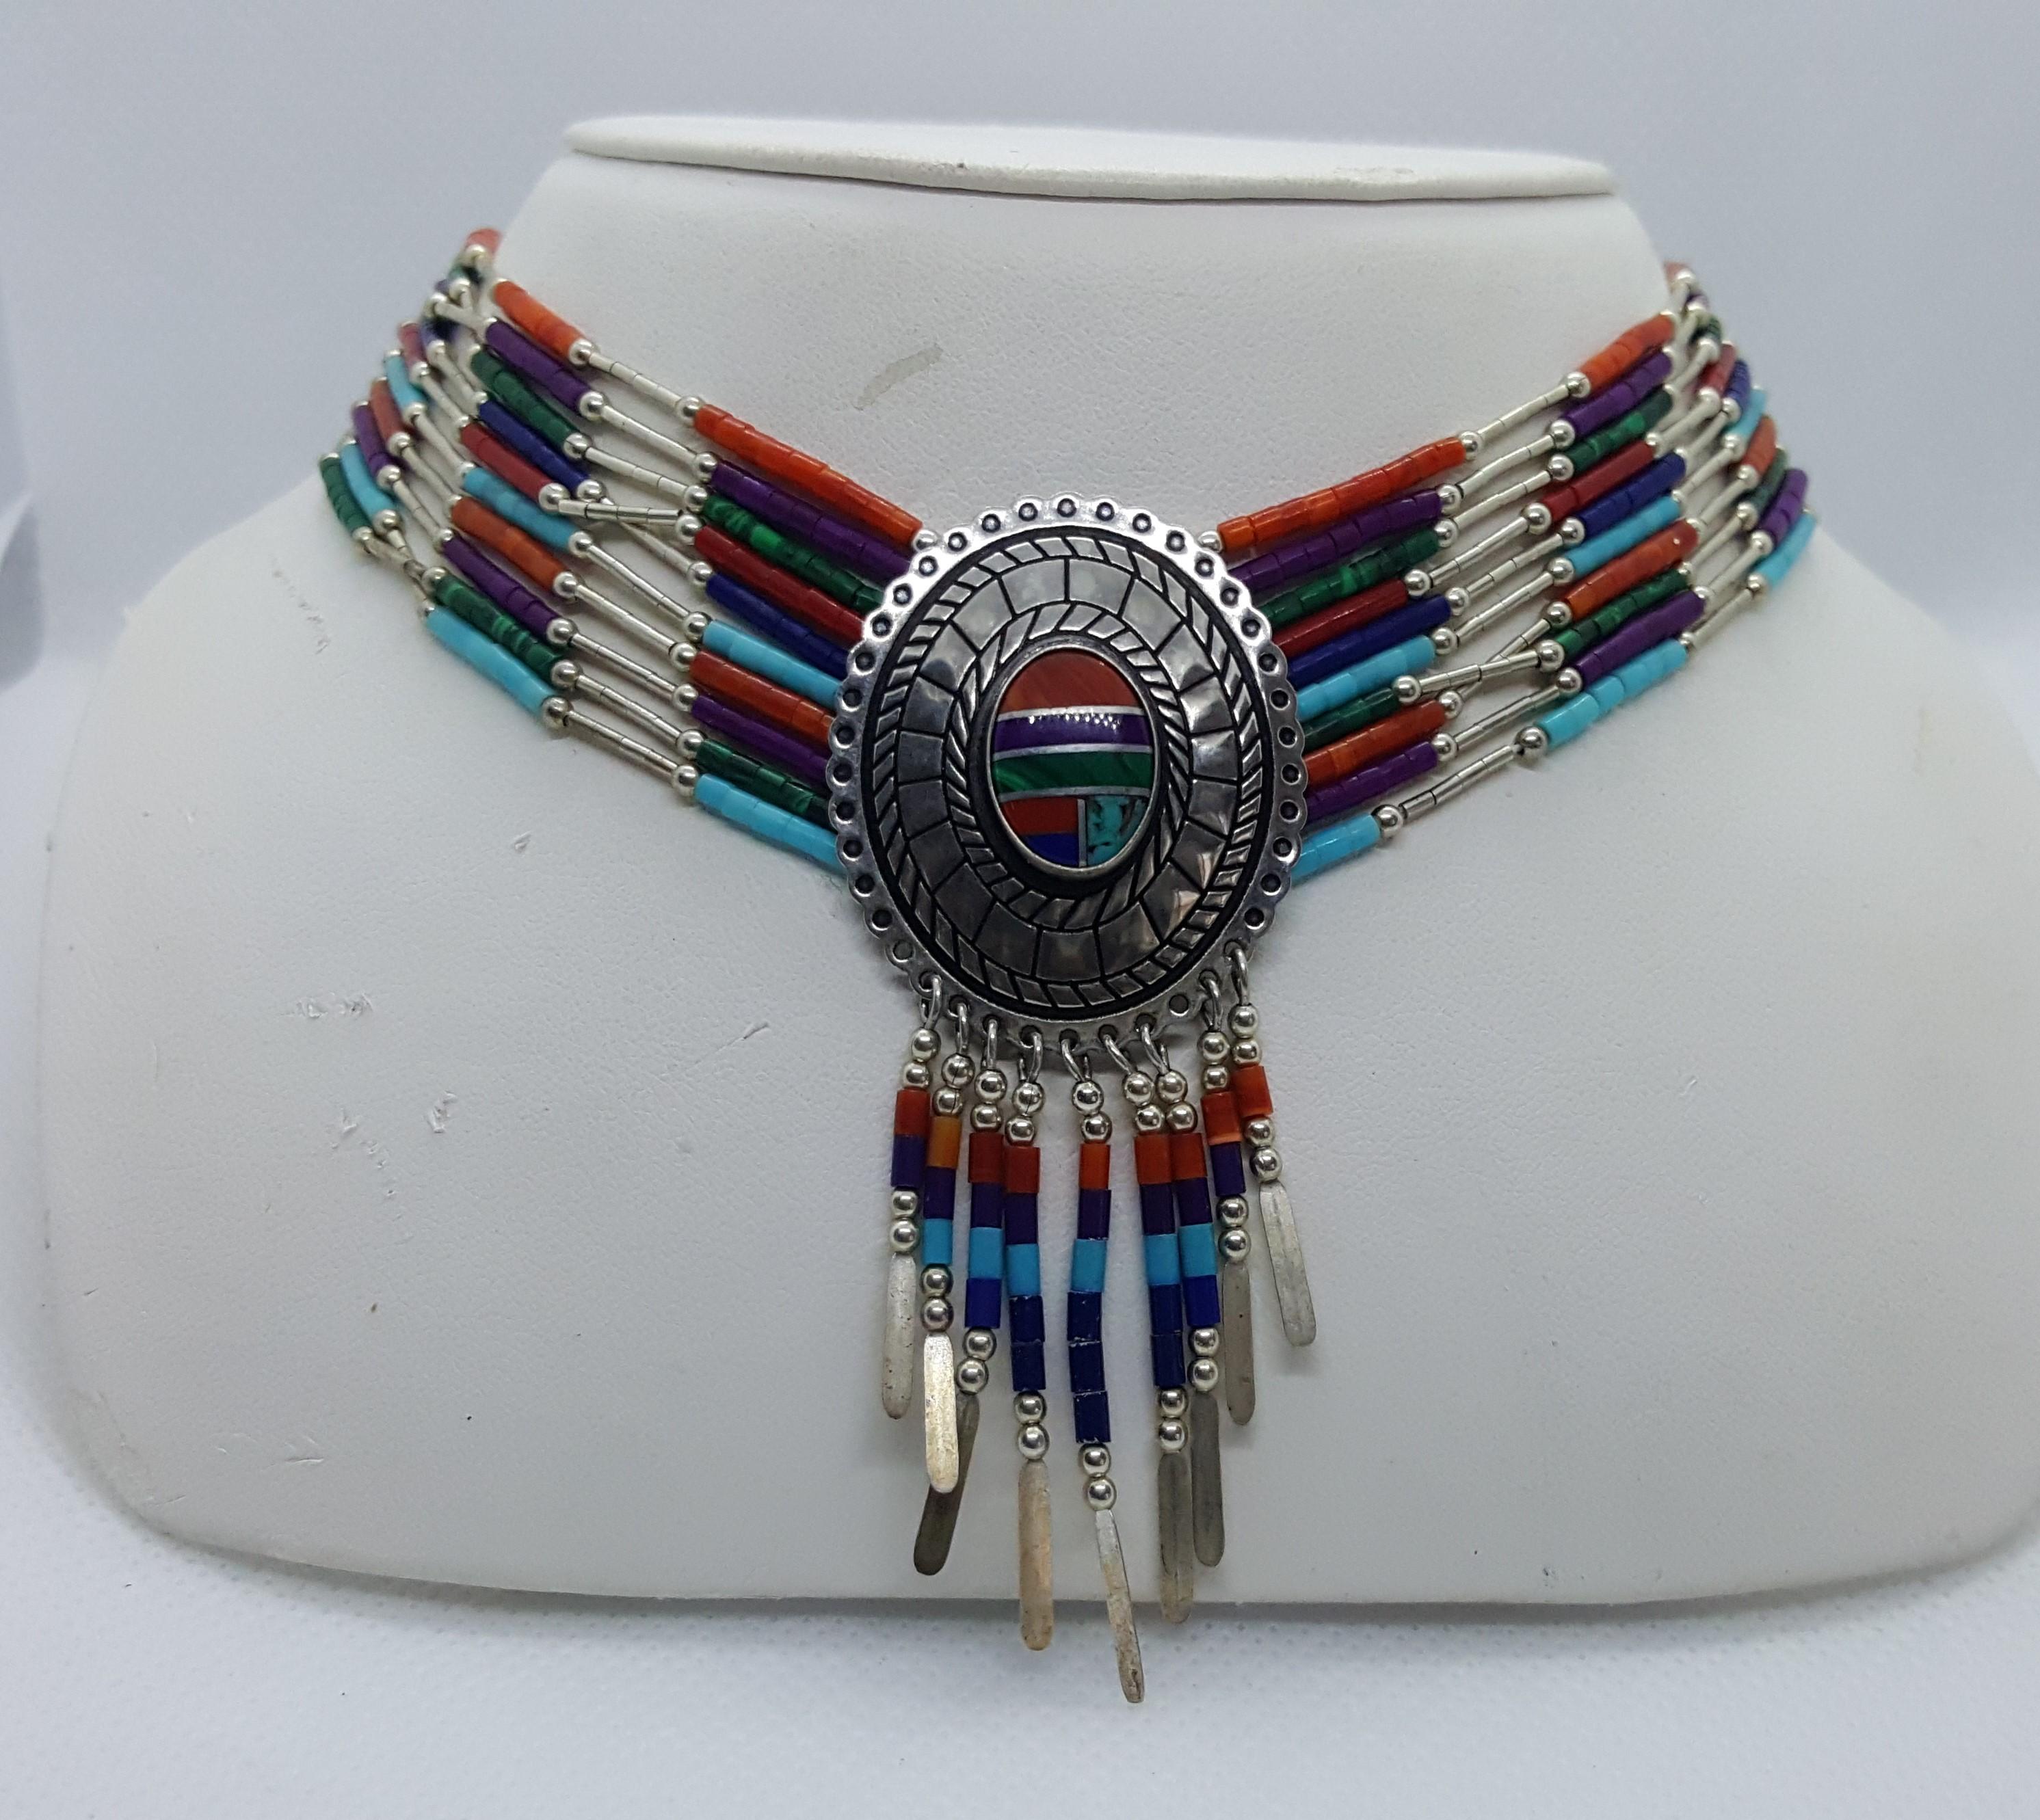 American Southwestern Jewelry Set with Dangle Earrings and Dangle Necklace with Pendant. This set weighs 50 grams and the necklace is 18 inches long. The earrings are 30mm by 35 mm in diameter. Multi-stone inlay. Made by Quoc Turquoise in